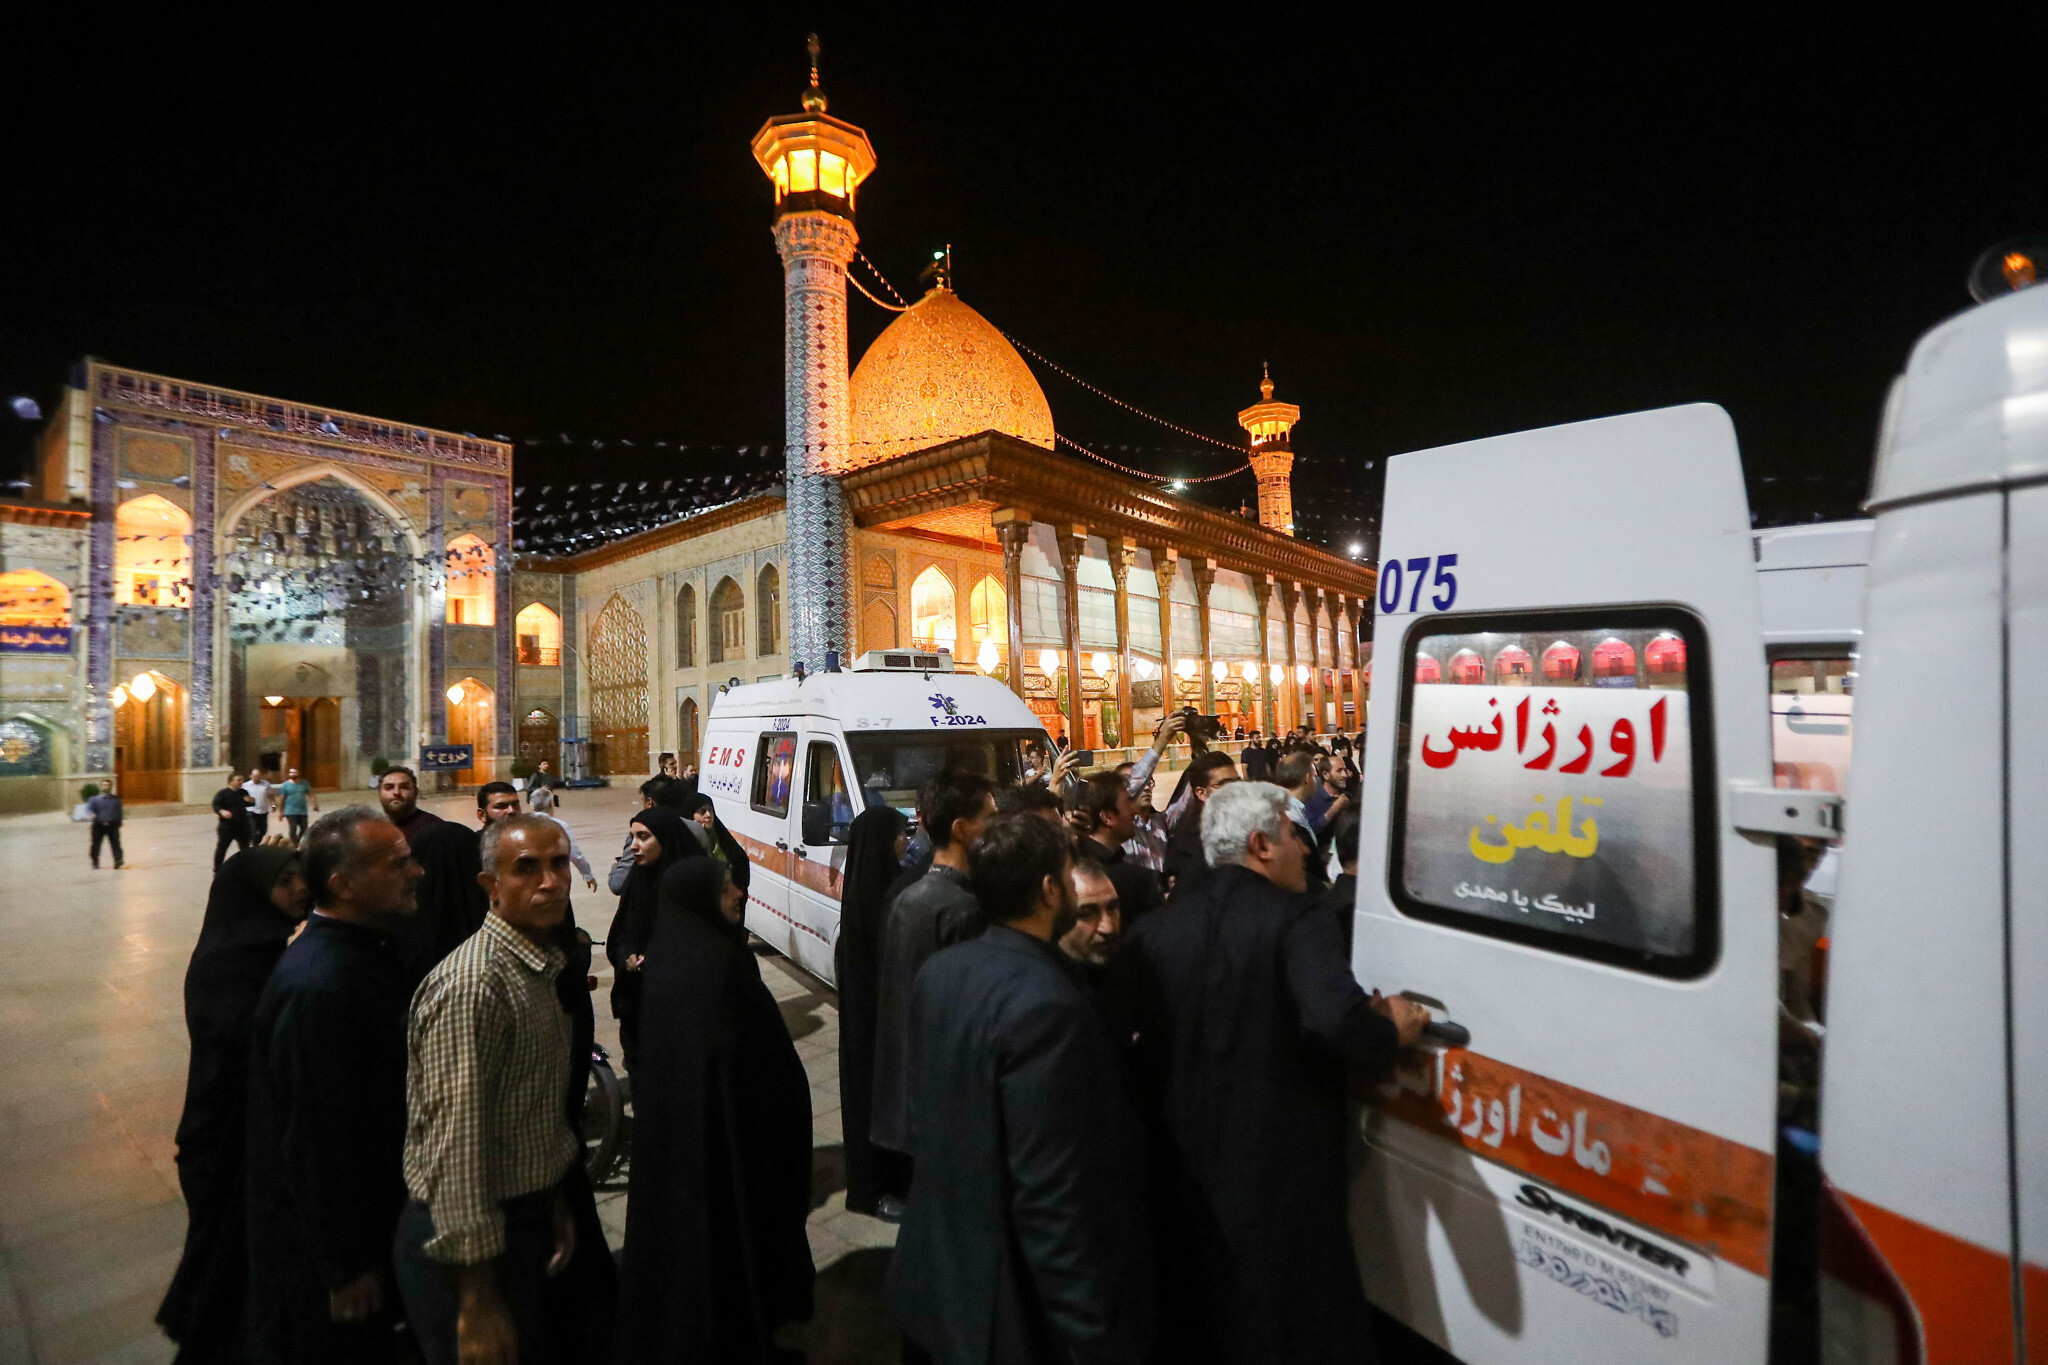 Emergency personnel transport the injured following a shooting attack at Iran's Shah Cheragh mausoleum